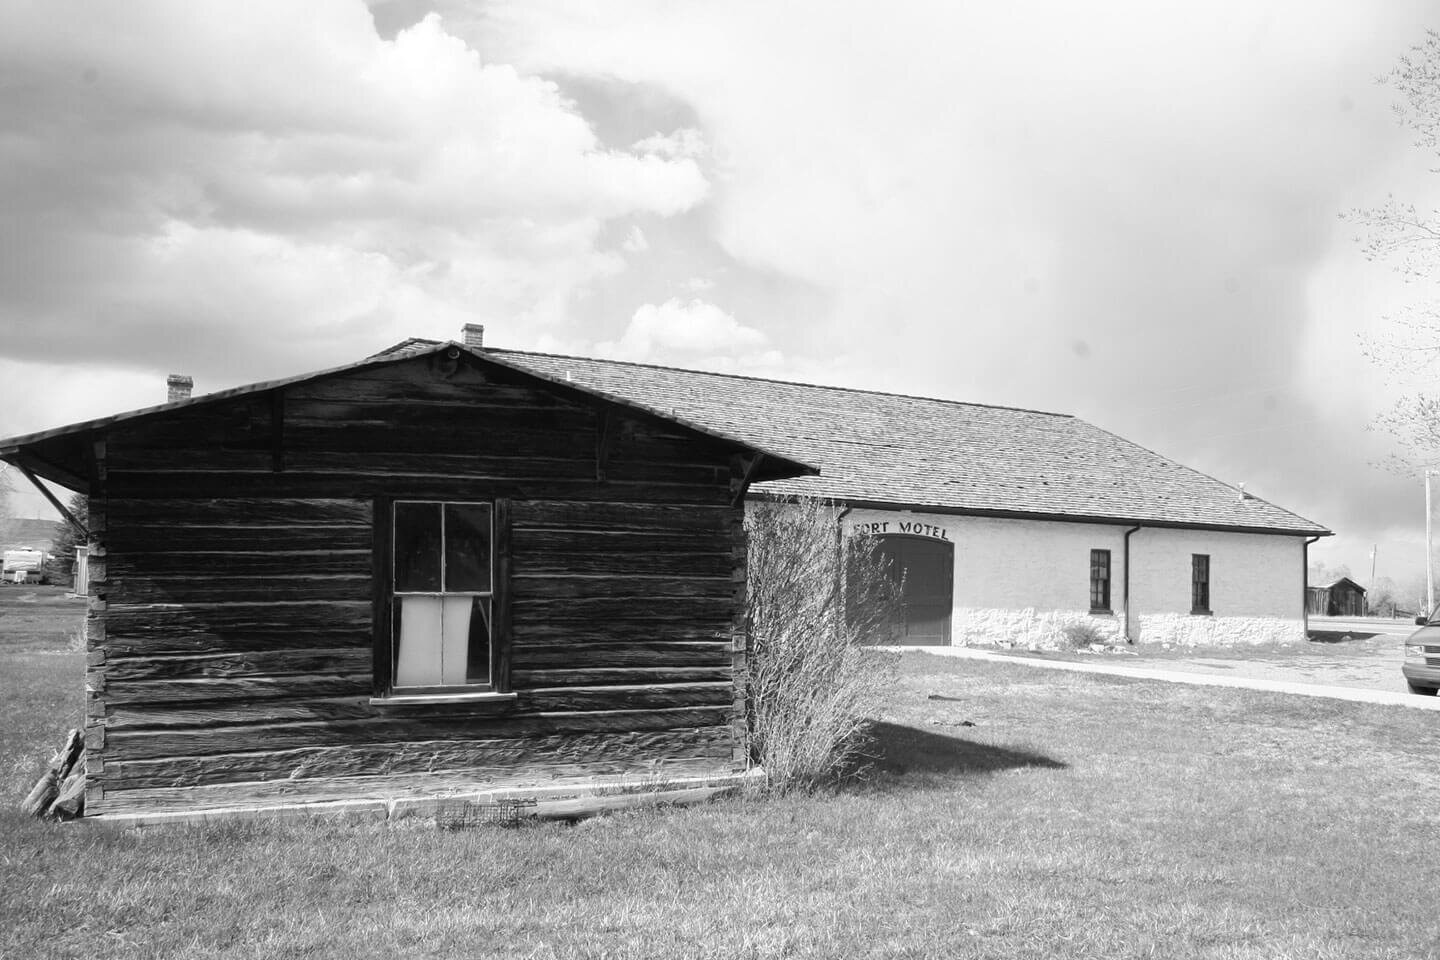 Historical log cabin next to white structure